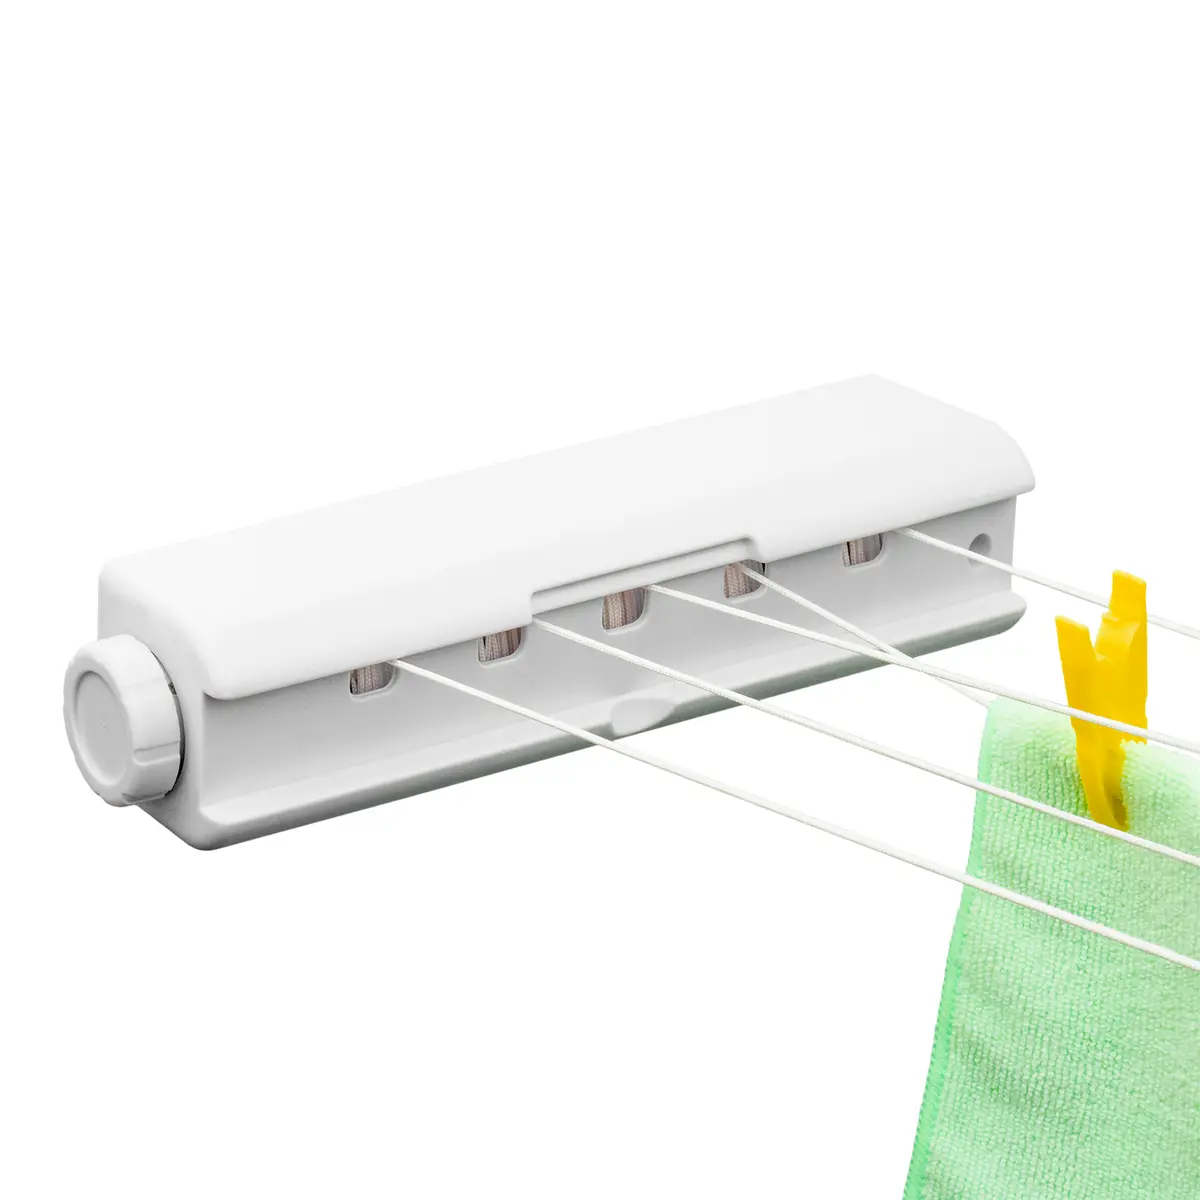 5 LINE INDOOR RETRACTABLE CLOTHES AIRER WASHING LINE LAUNDRY DRYER WALL  MOUNTED